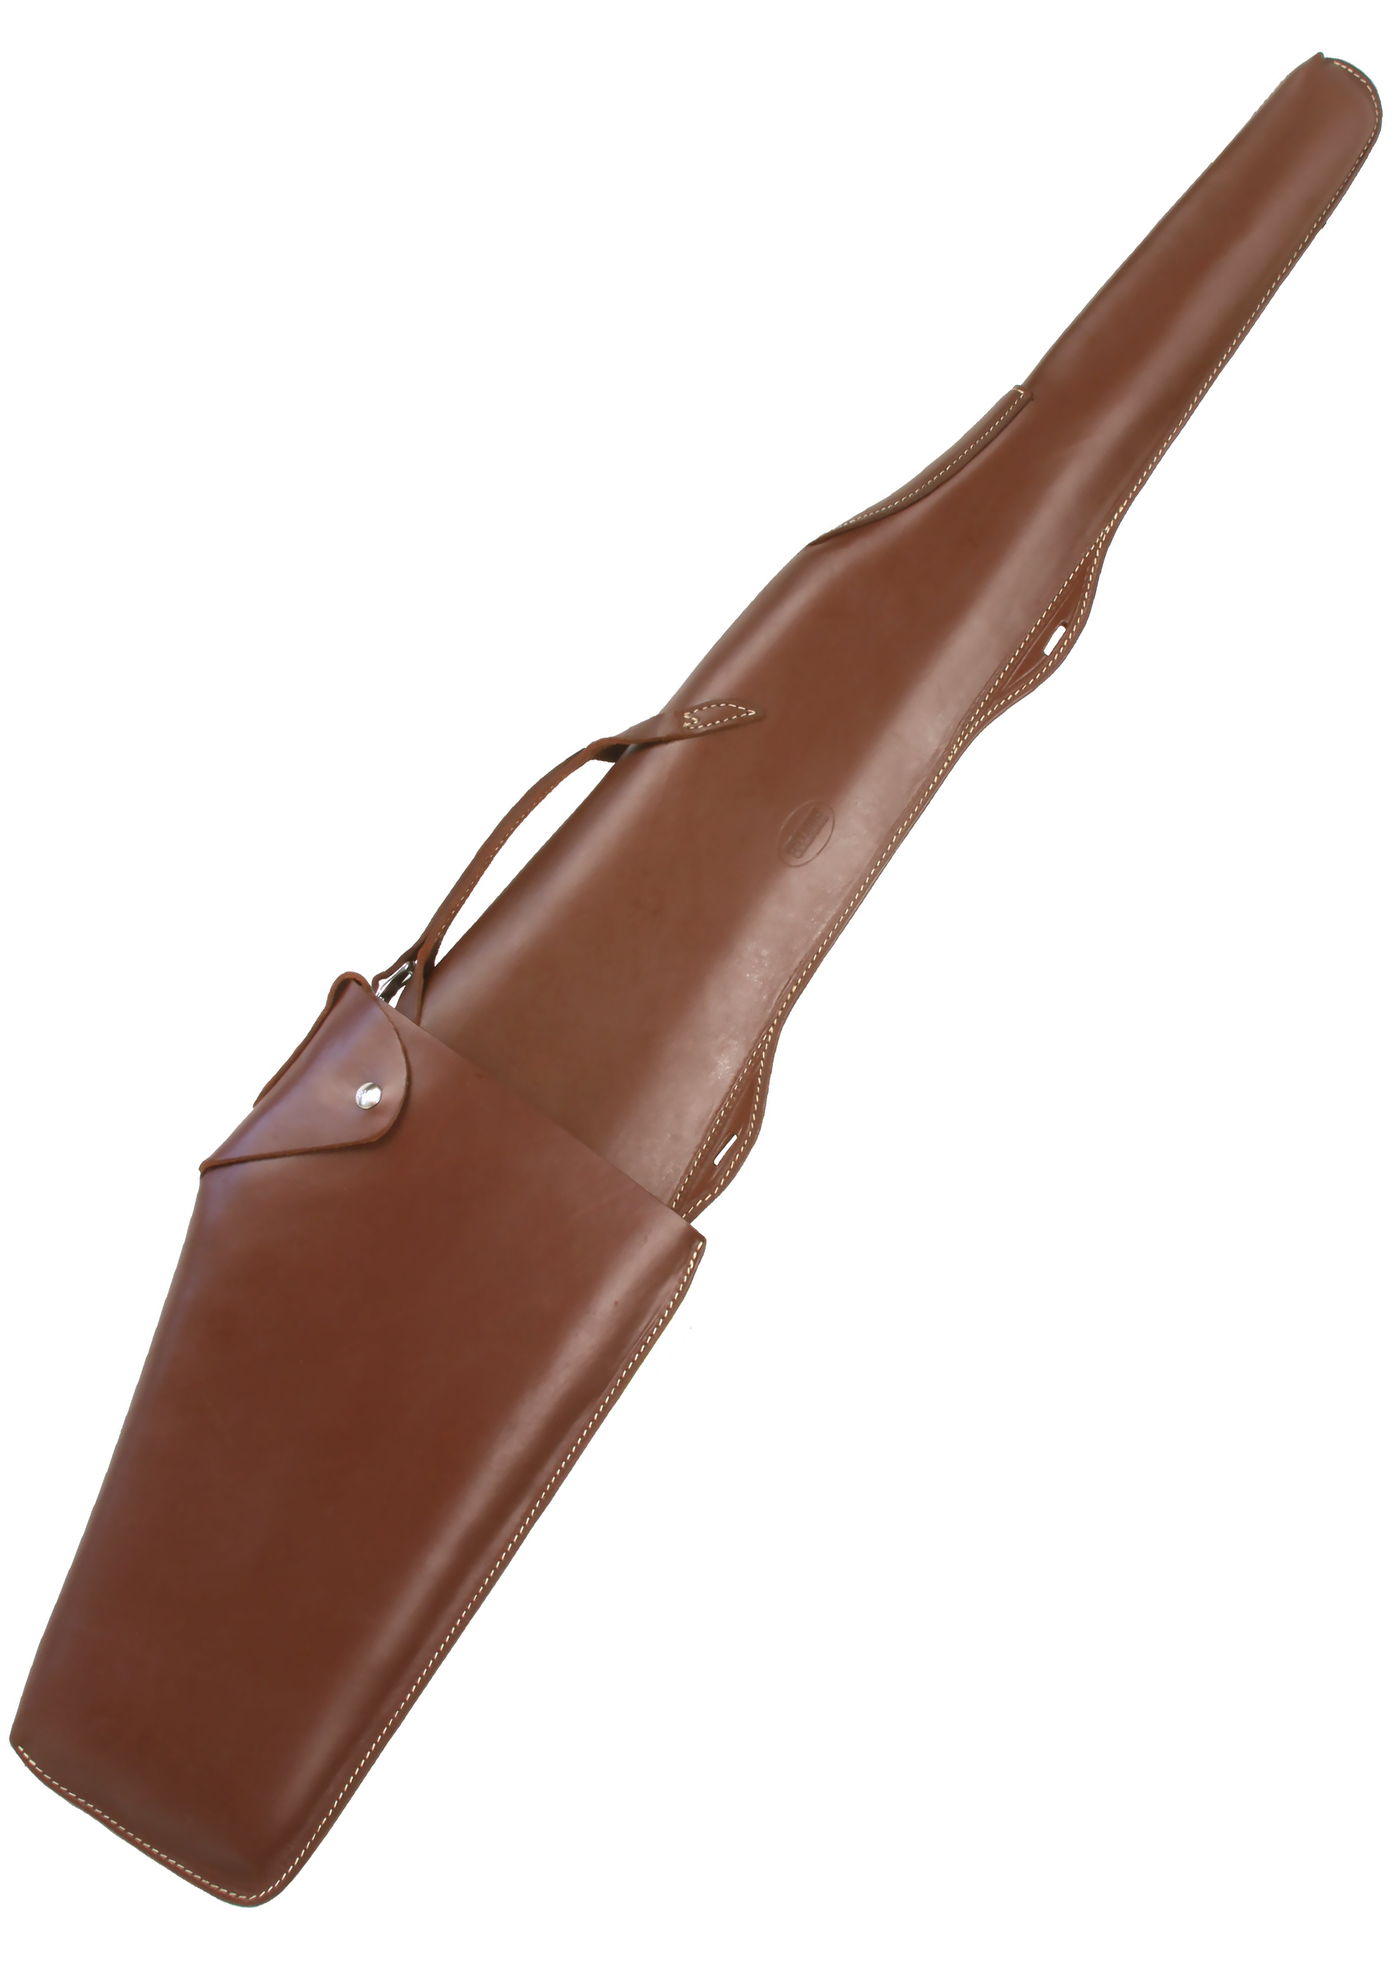 Full Length Leather Scabbard -  26"